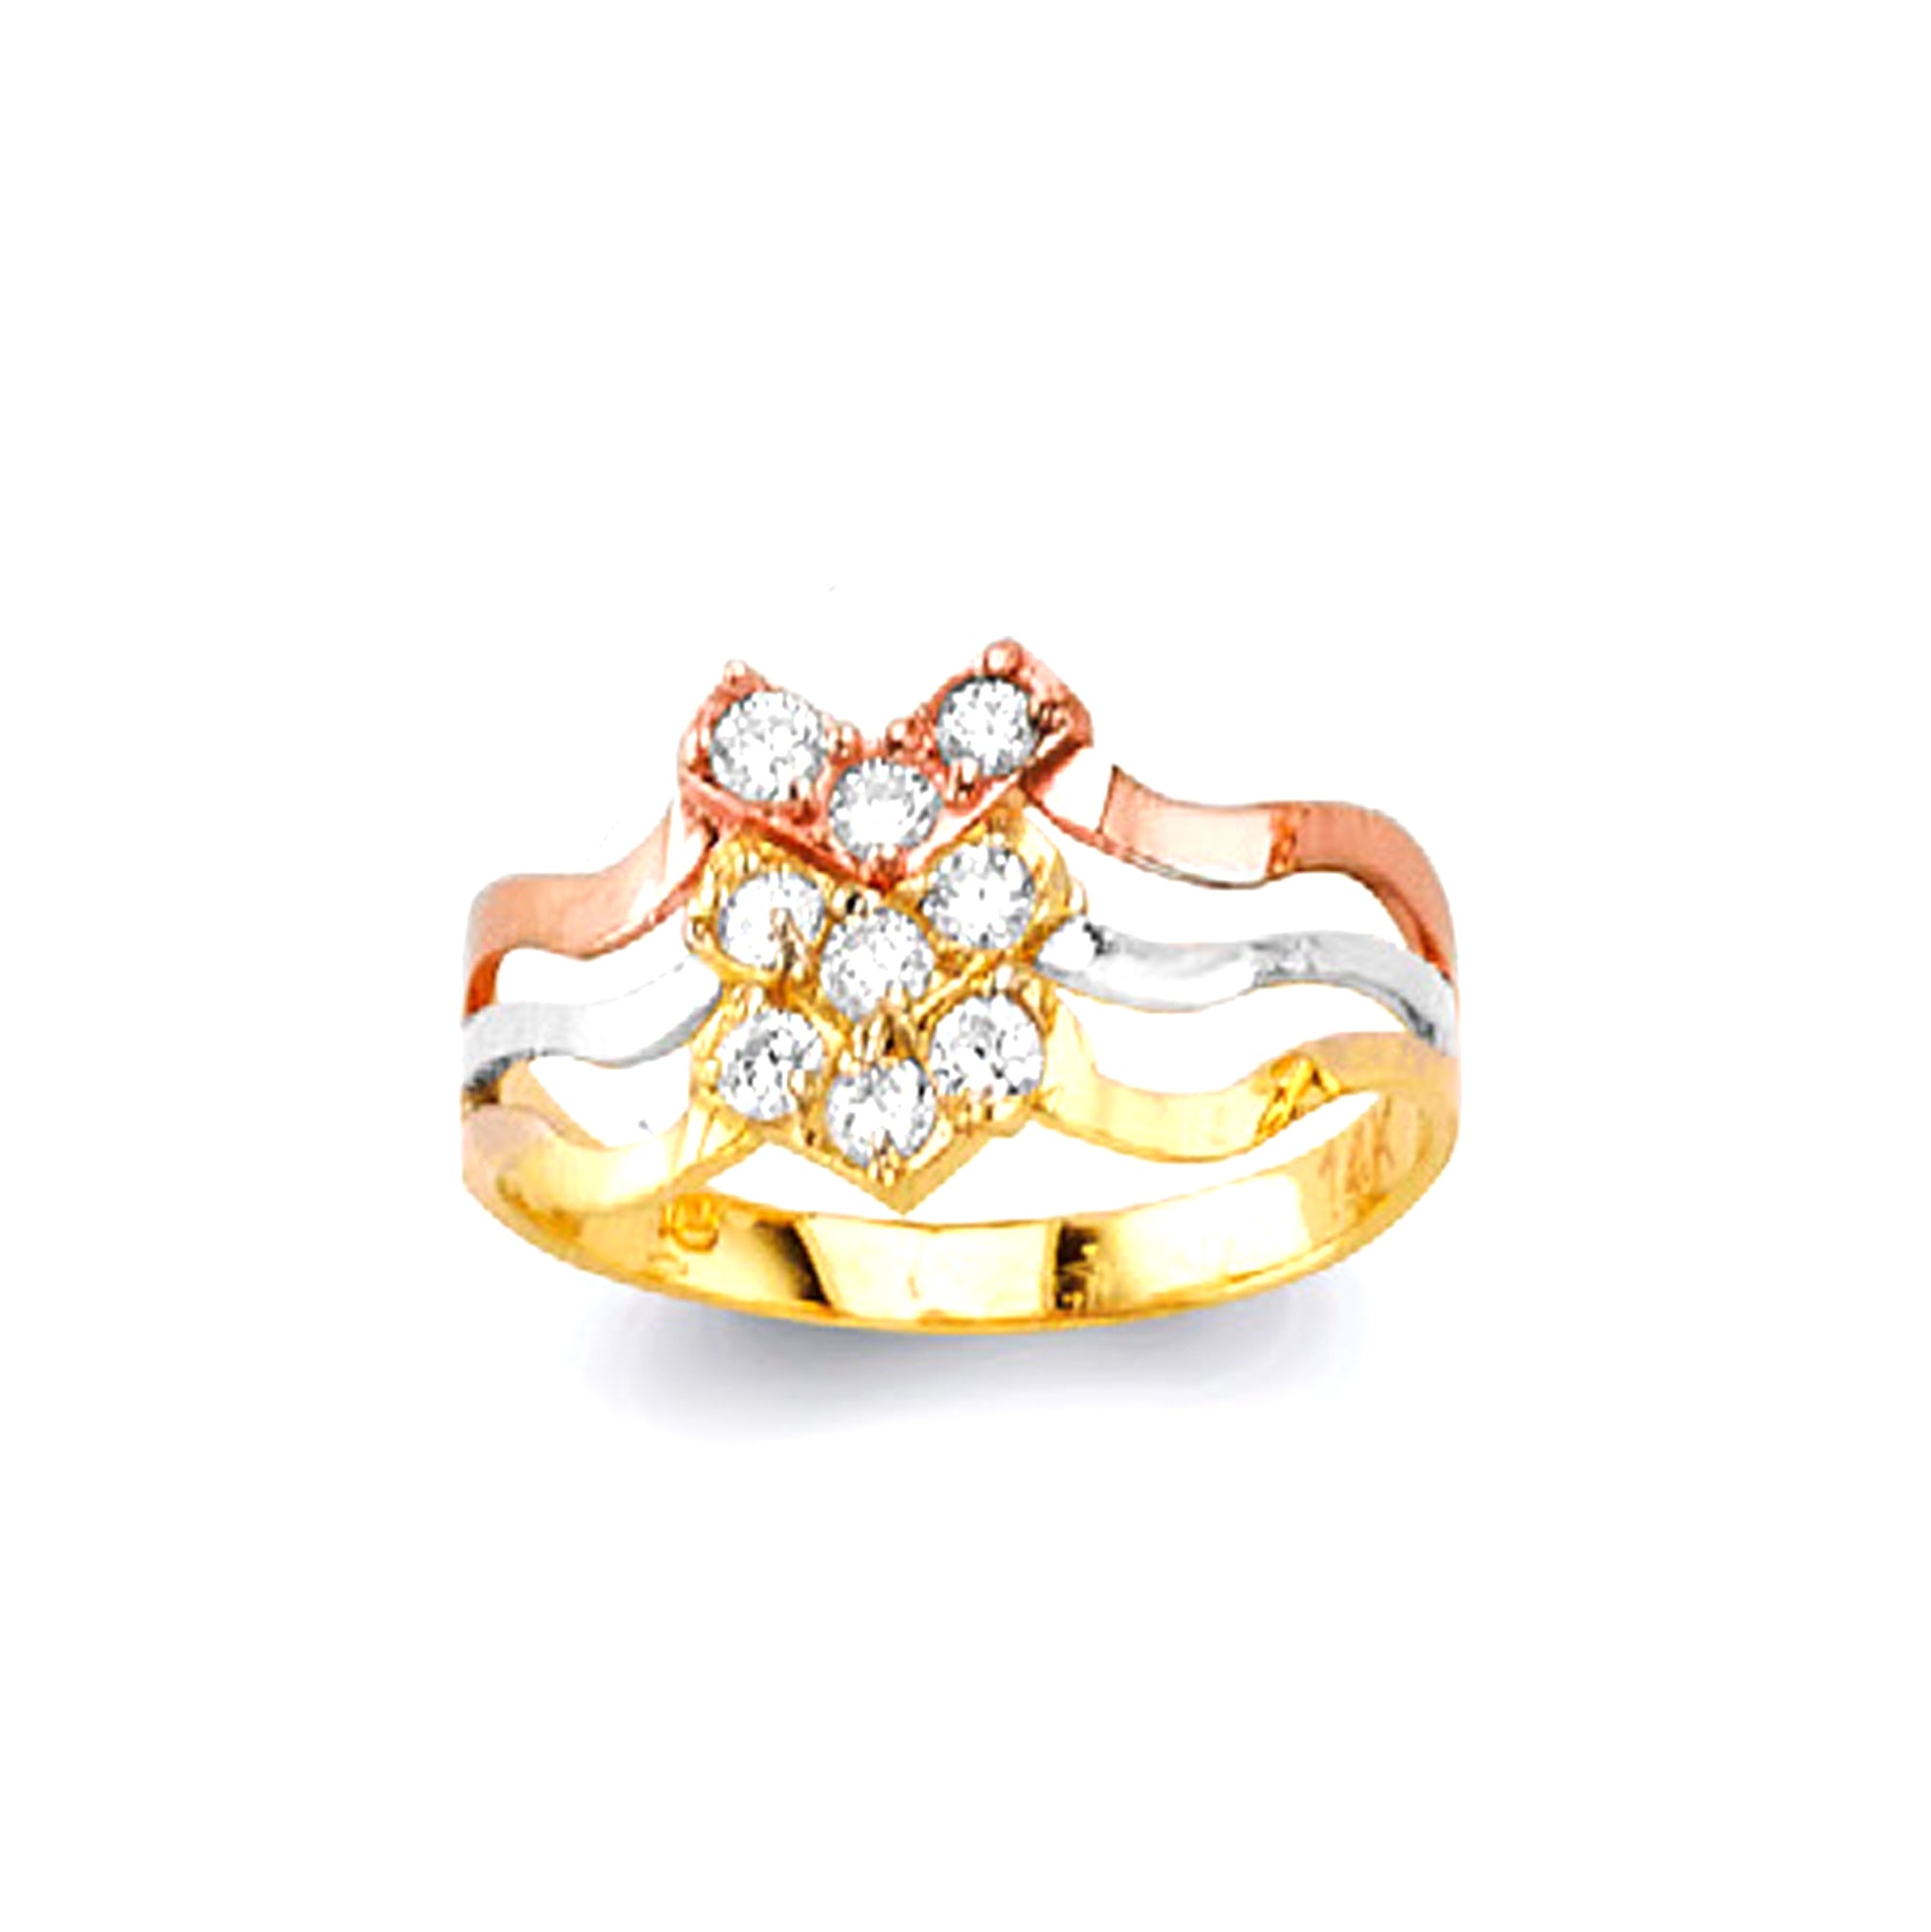 CZ Surreal Crown Shaped Ring in Solid Gold